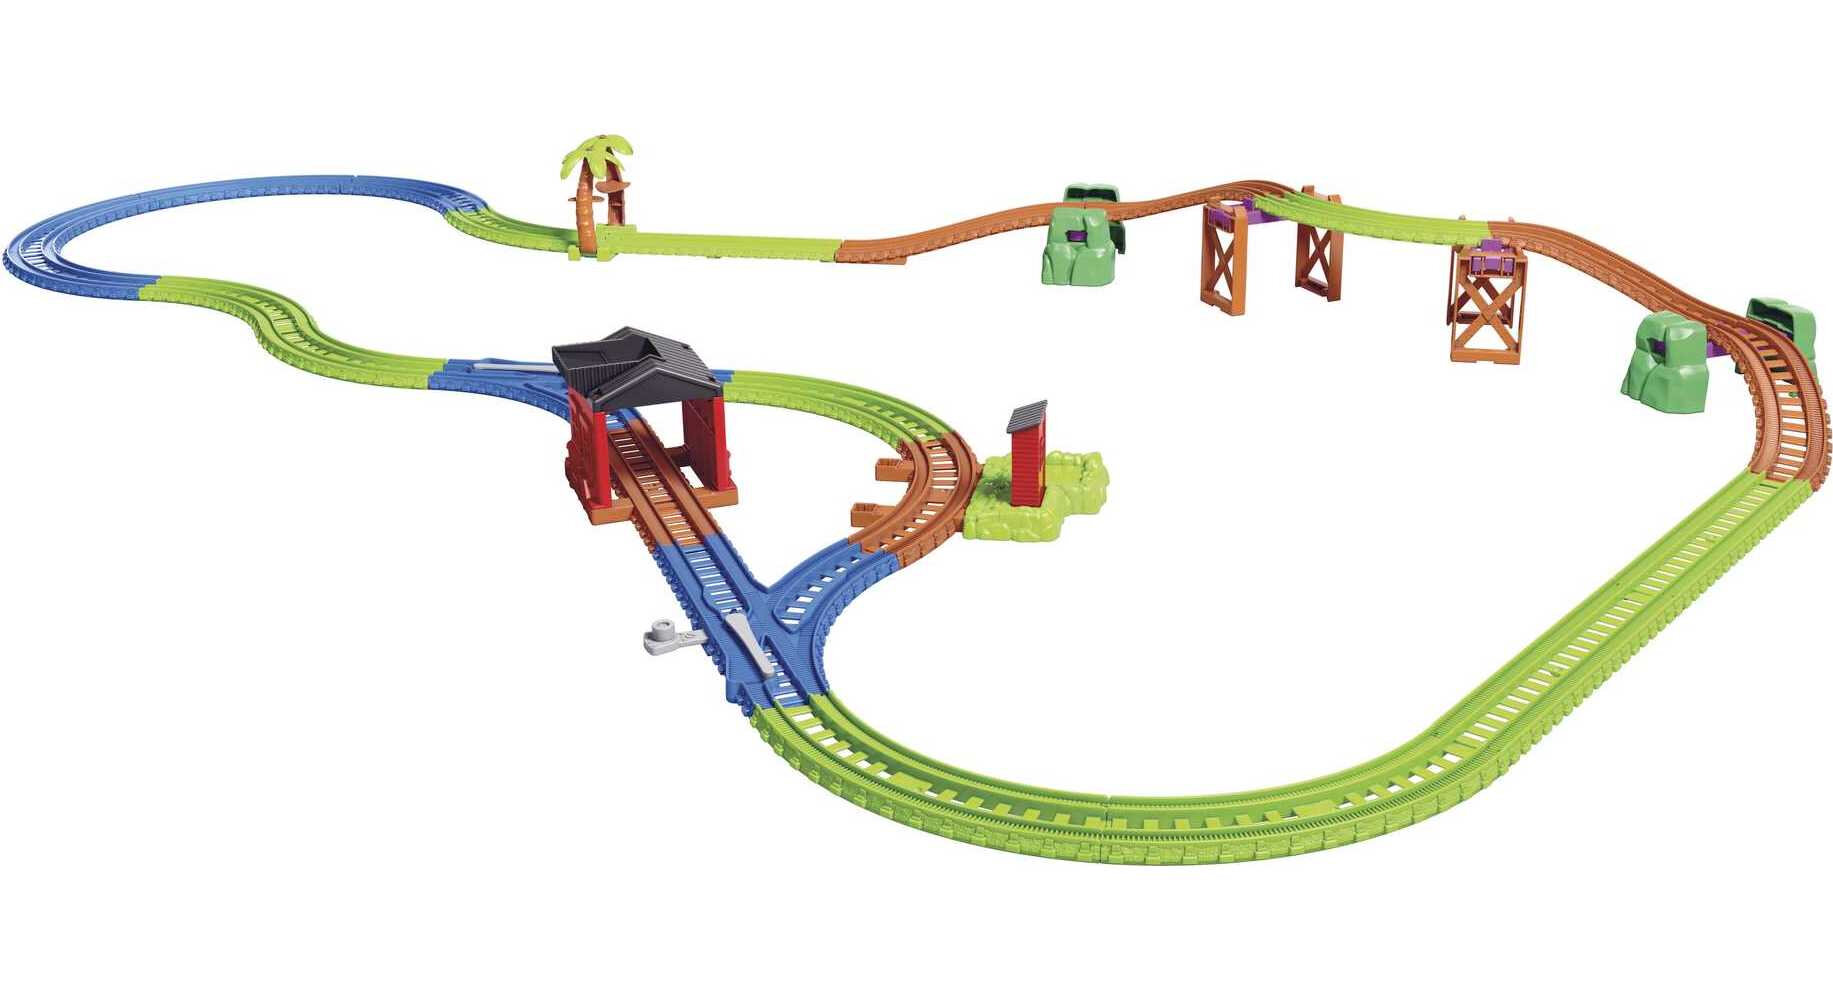 Thomas & Friends Thomas & Nia Cargo Delivery Diecast Toy Train & Track Set, 50 Pieces - image 1 of 6